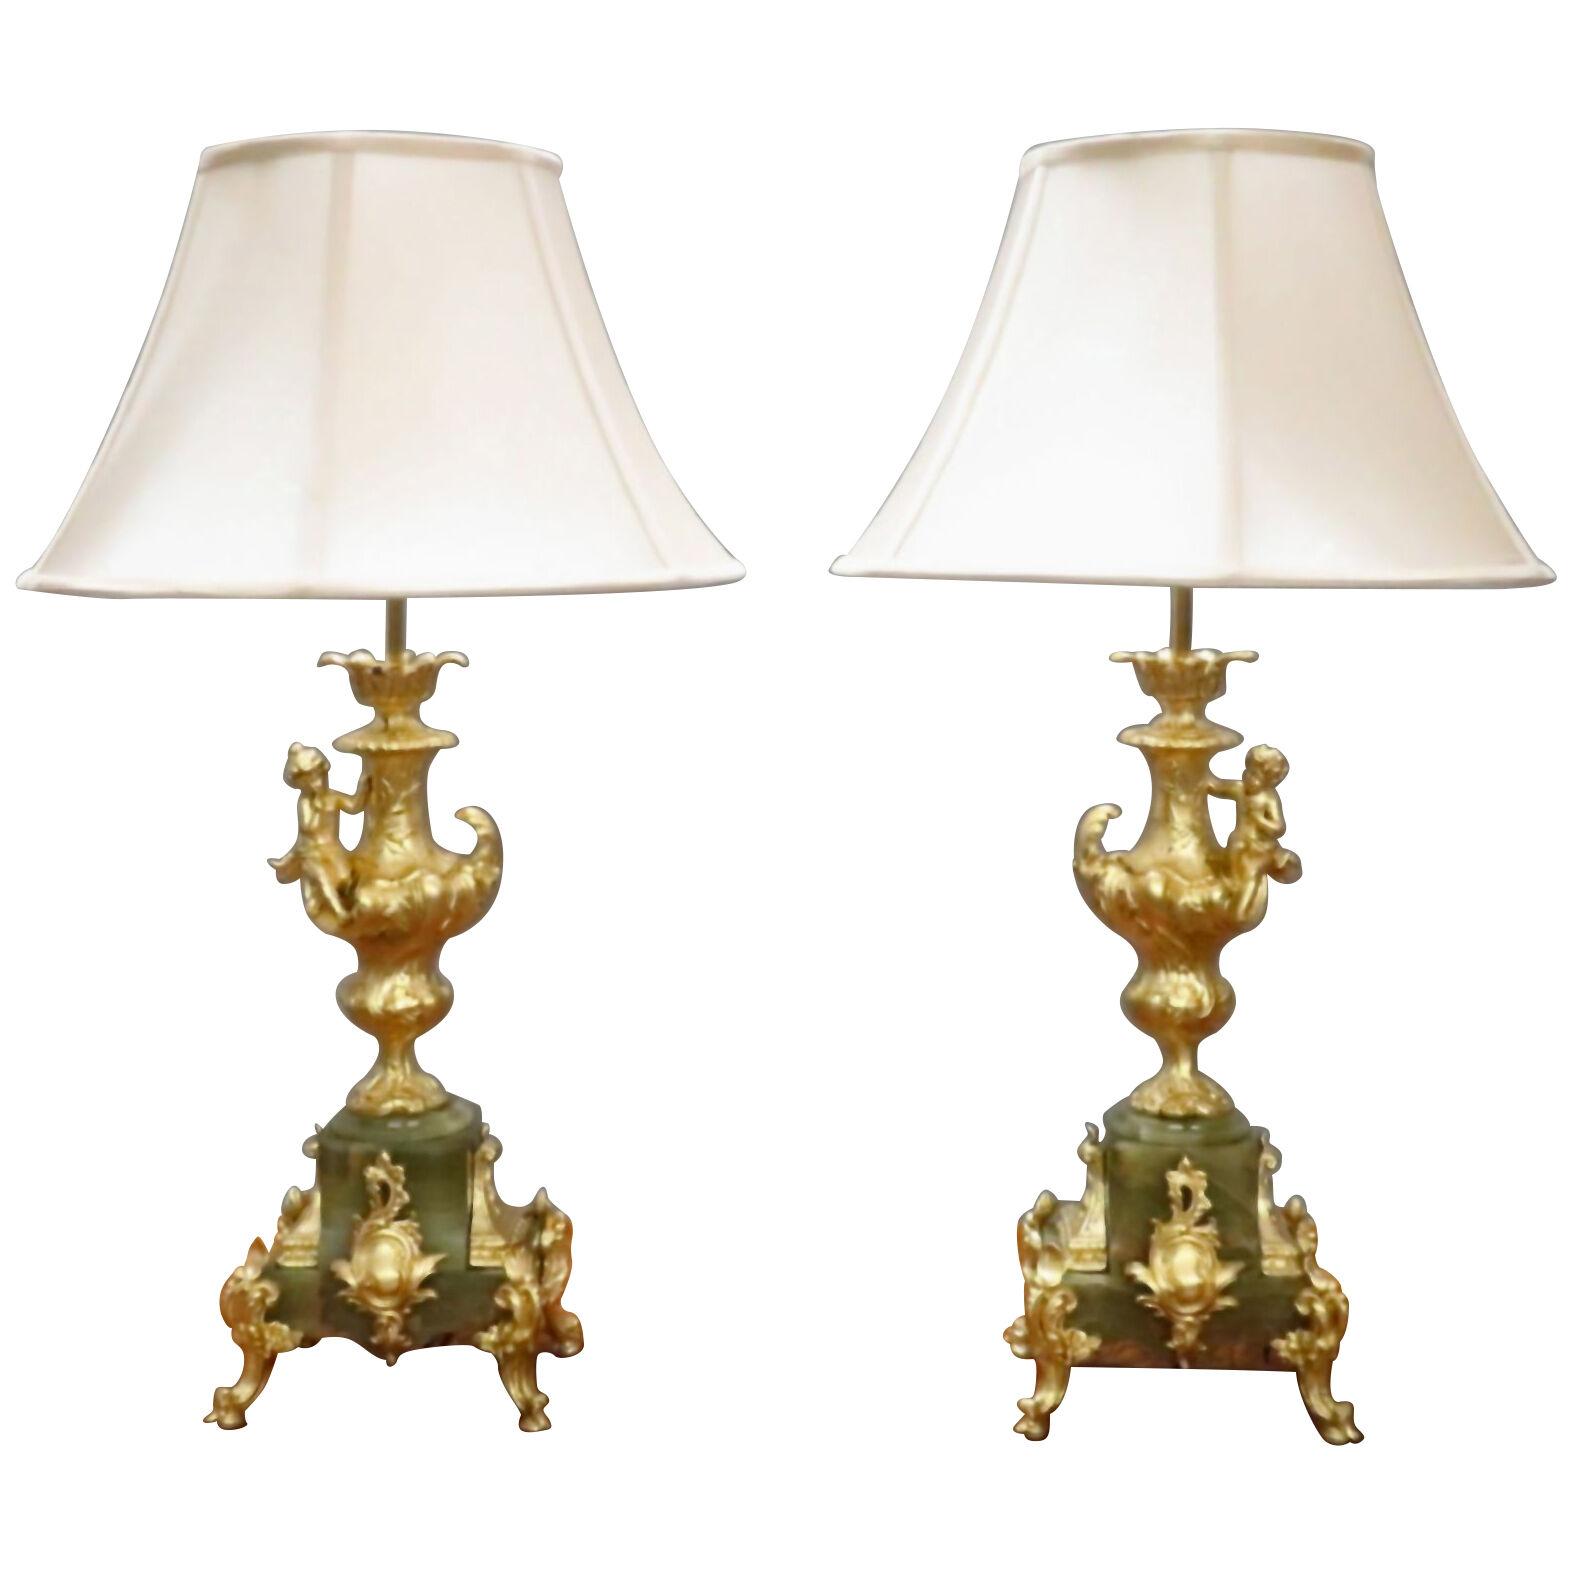 Pair of French Louis XV Style Gilt and Onyx Table Lamps